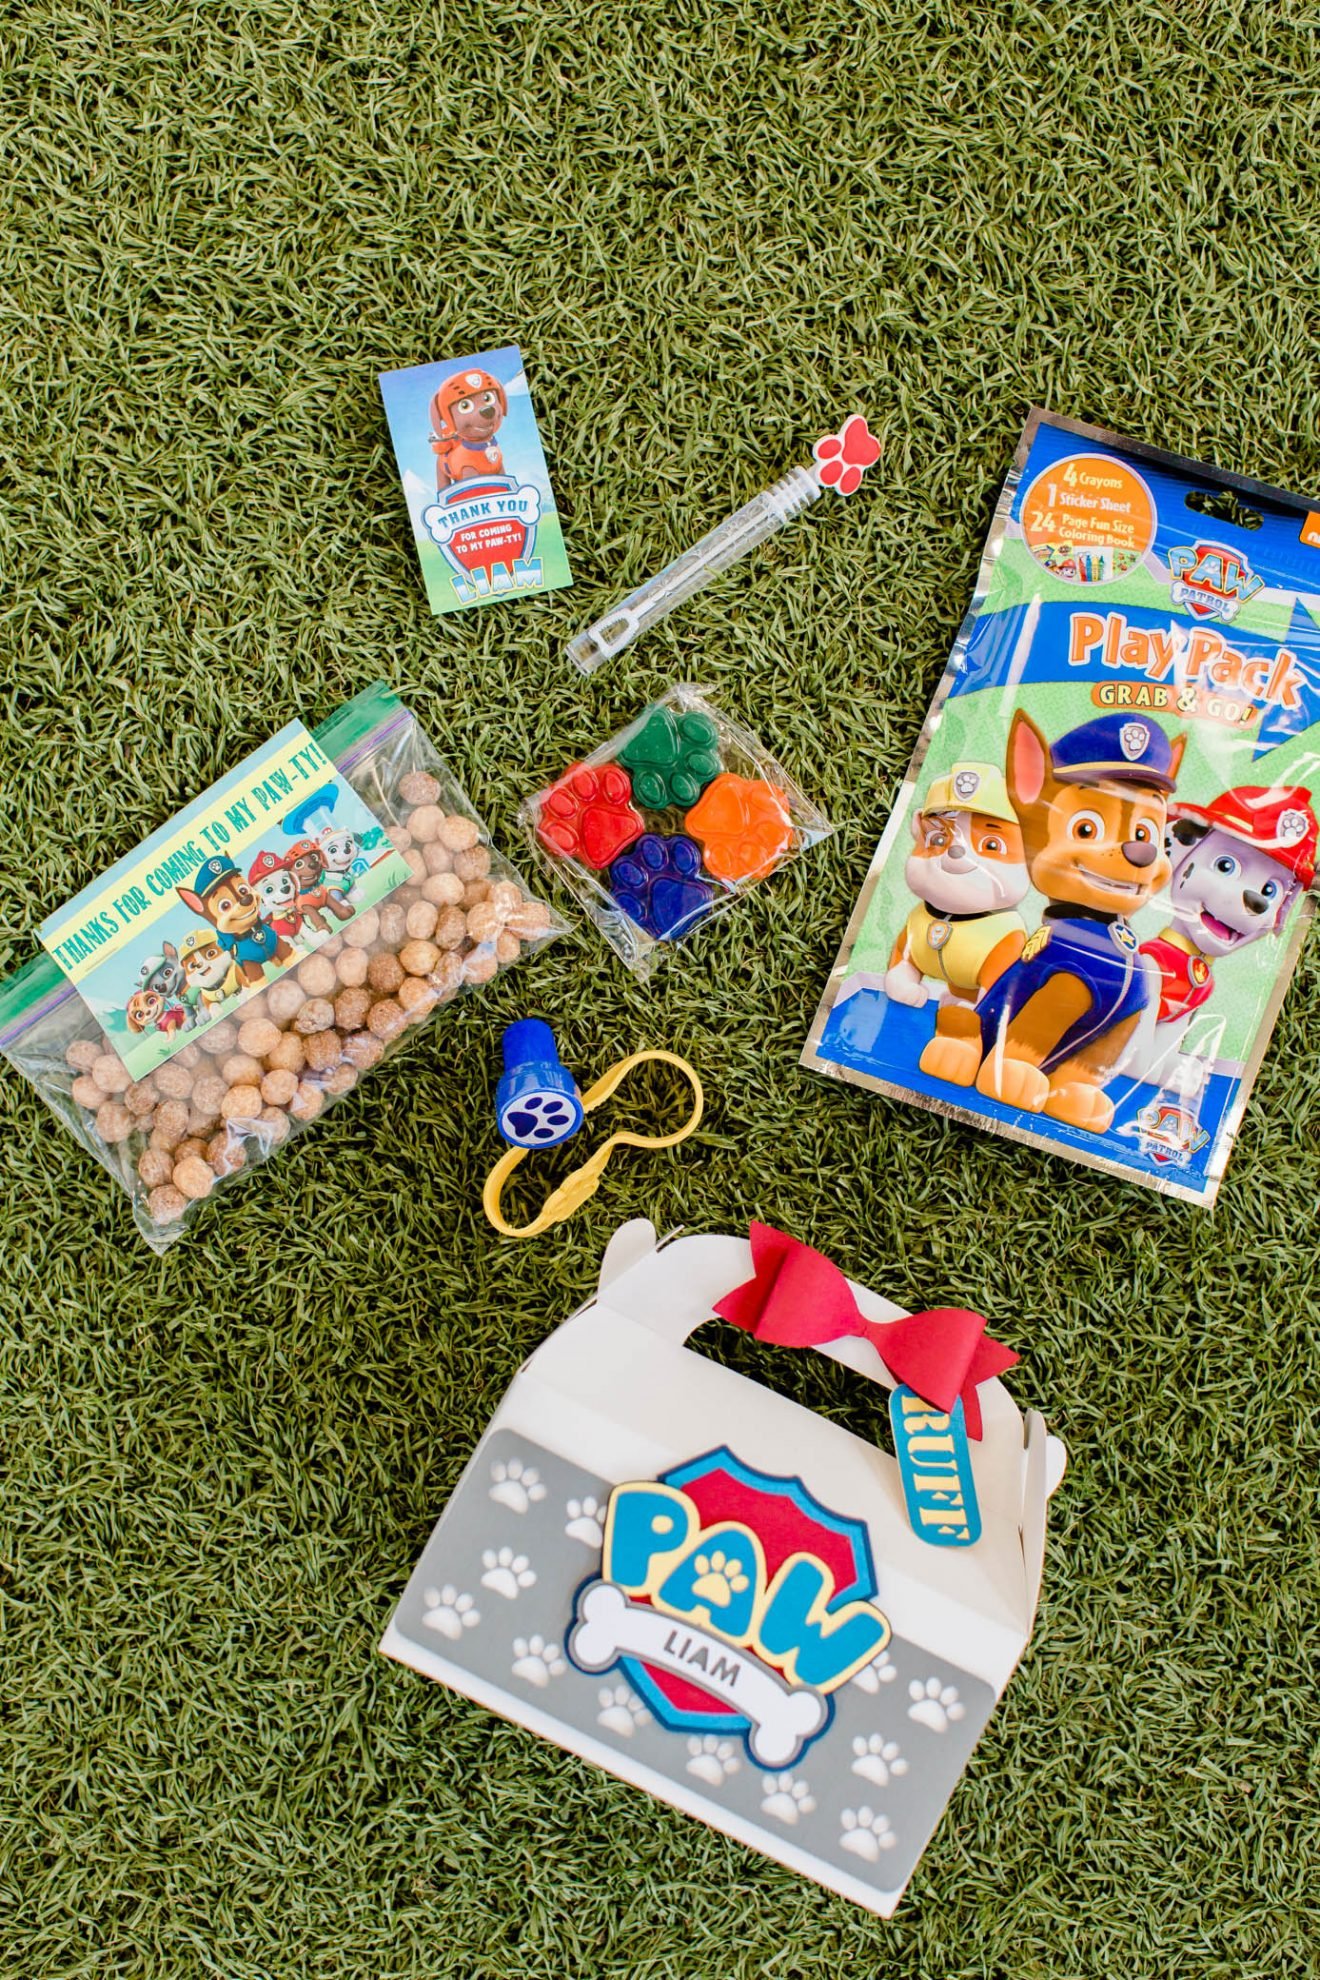 Paw Patrol favor gift boxes and gifts.